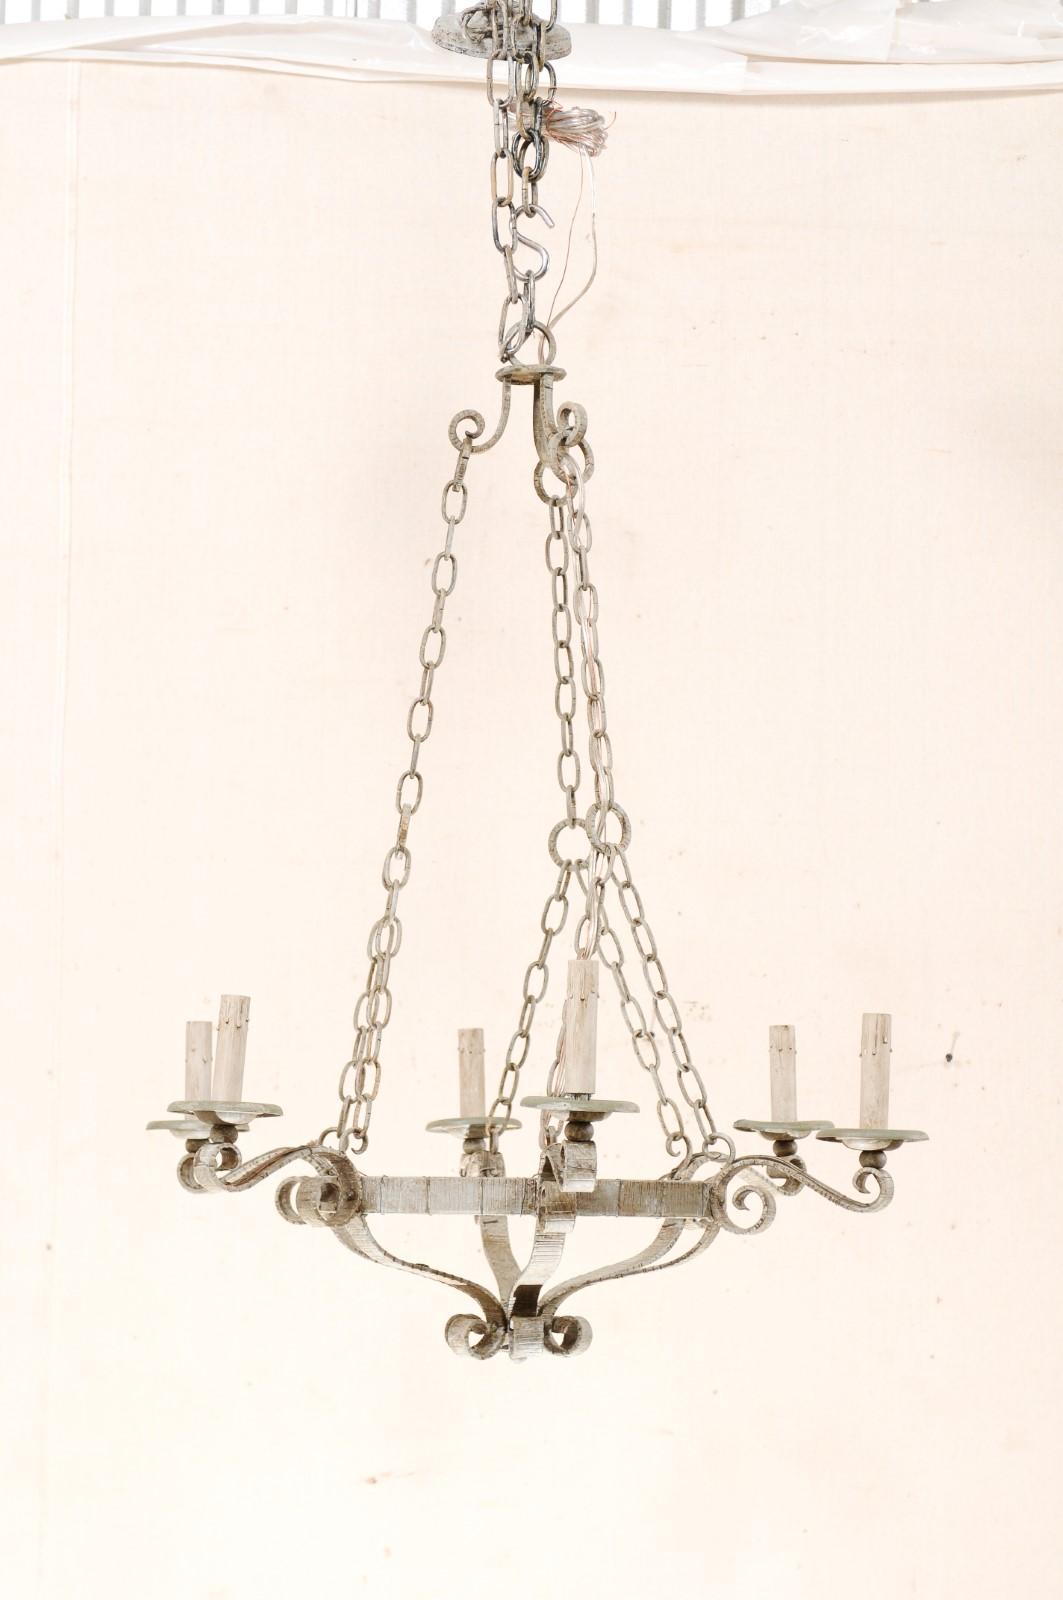 A French six-light painted iron chandelier from the mid-20th century. This vintage painted iron chandelier from France features a textured central ring with a shallow-basket design with scrolling accents at the bottom of the light. Six S-scroll arms